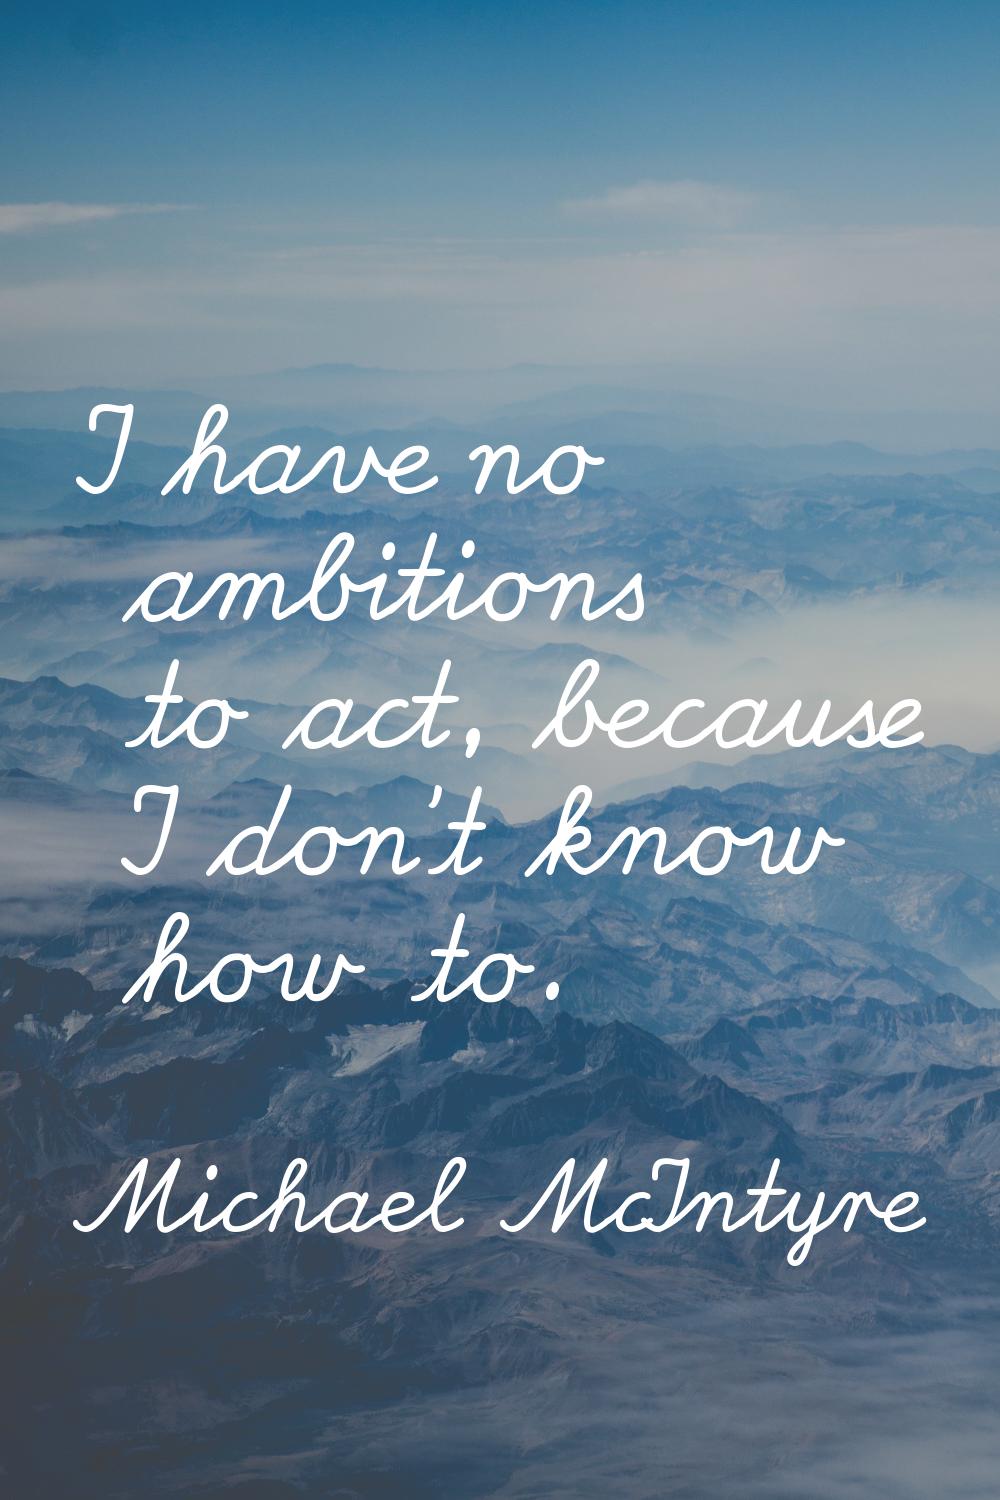 I have no ambitions to act, because I don't know how to.